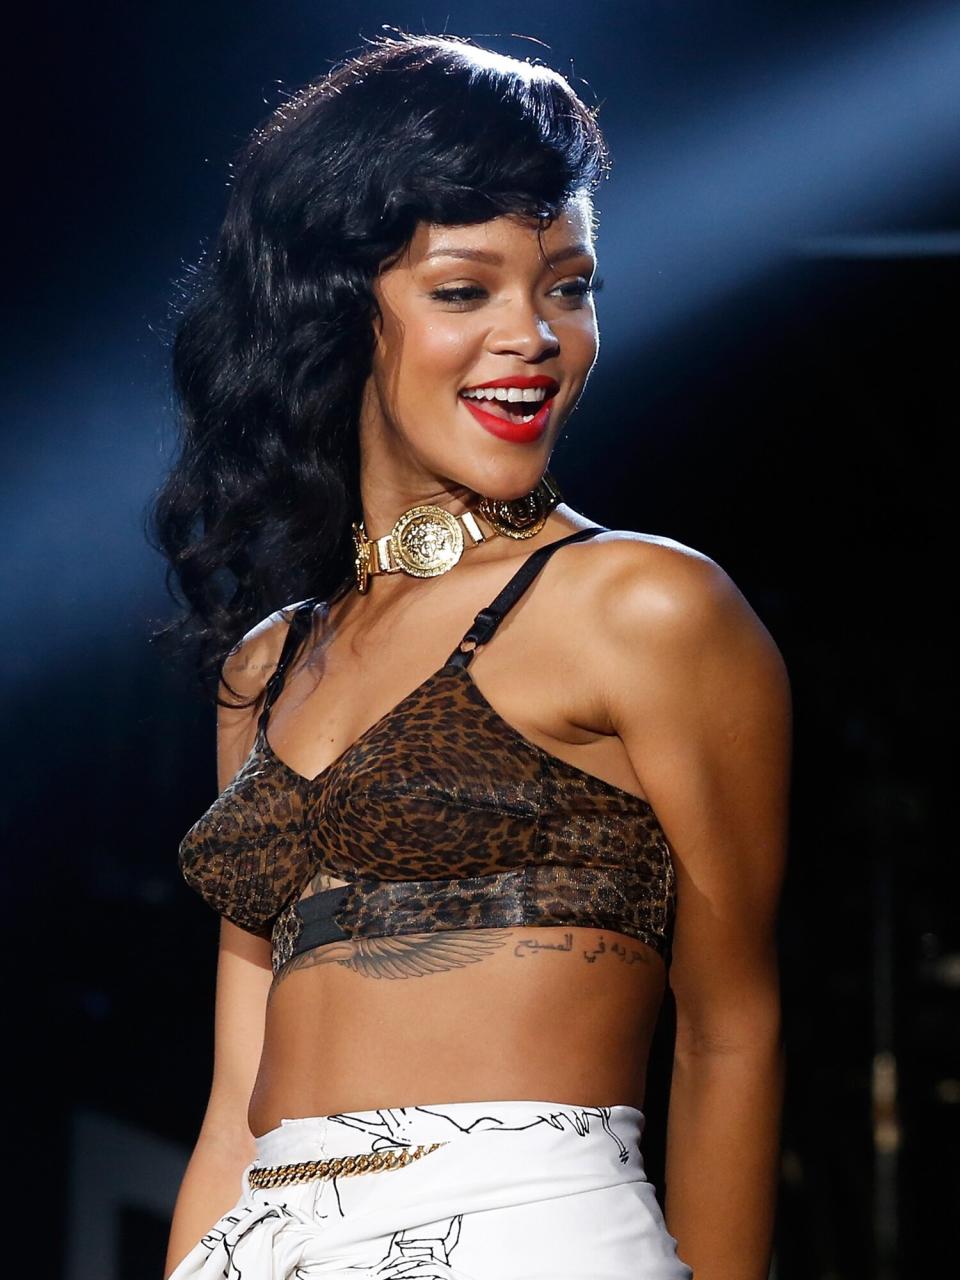 Rihanna performs live on stage as part of her 777 tour at The Forum on November 19, 2012 in London, England